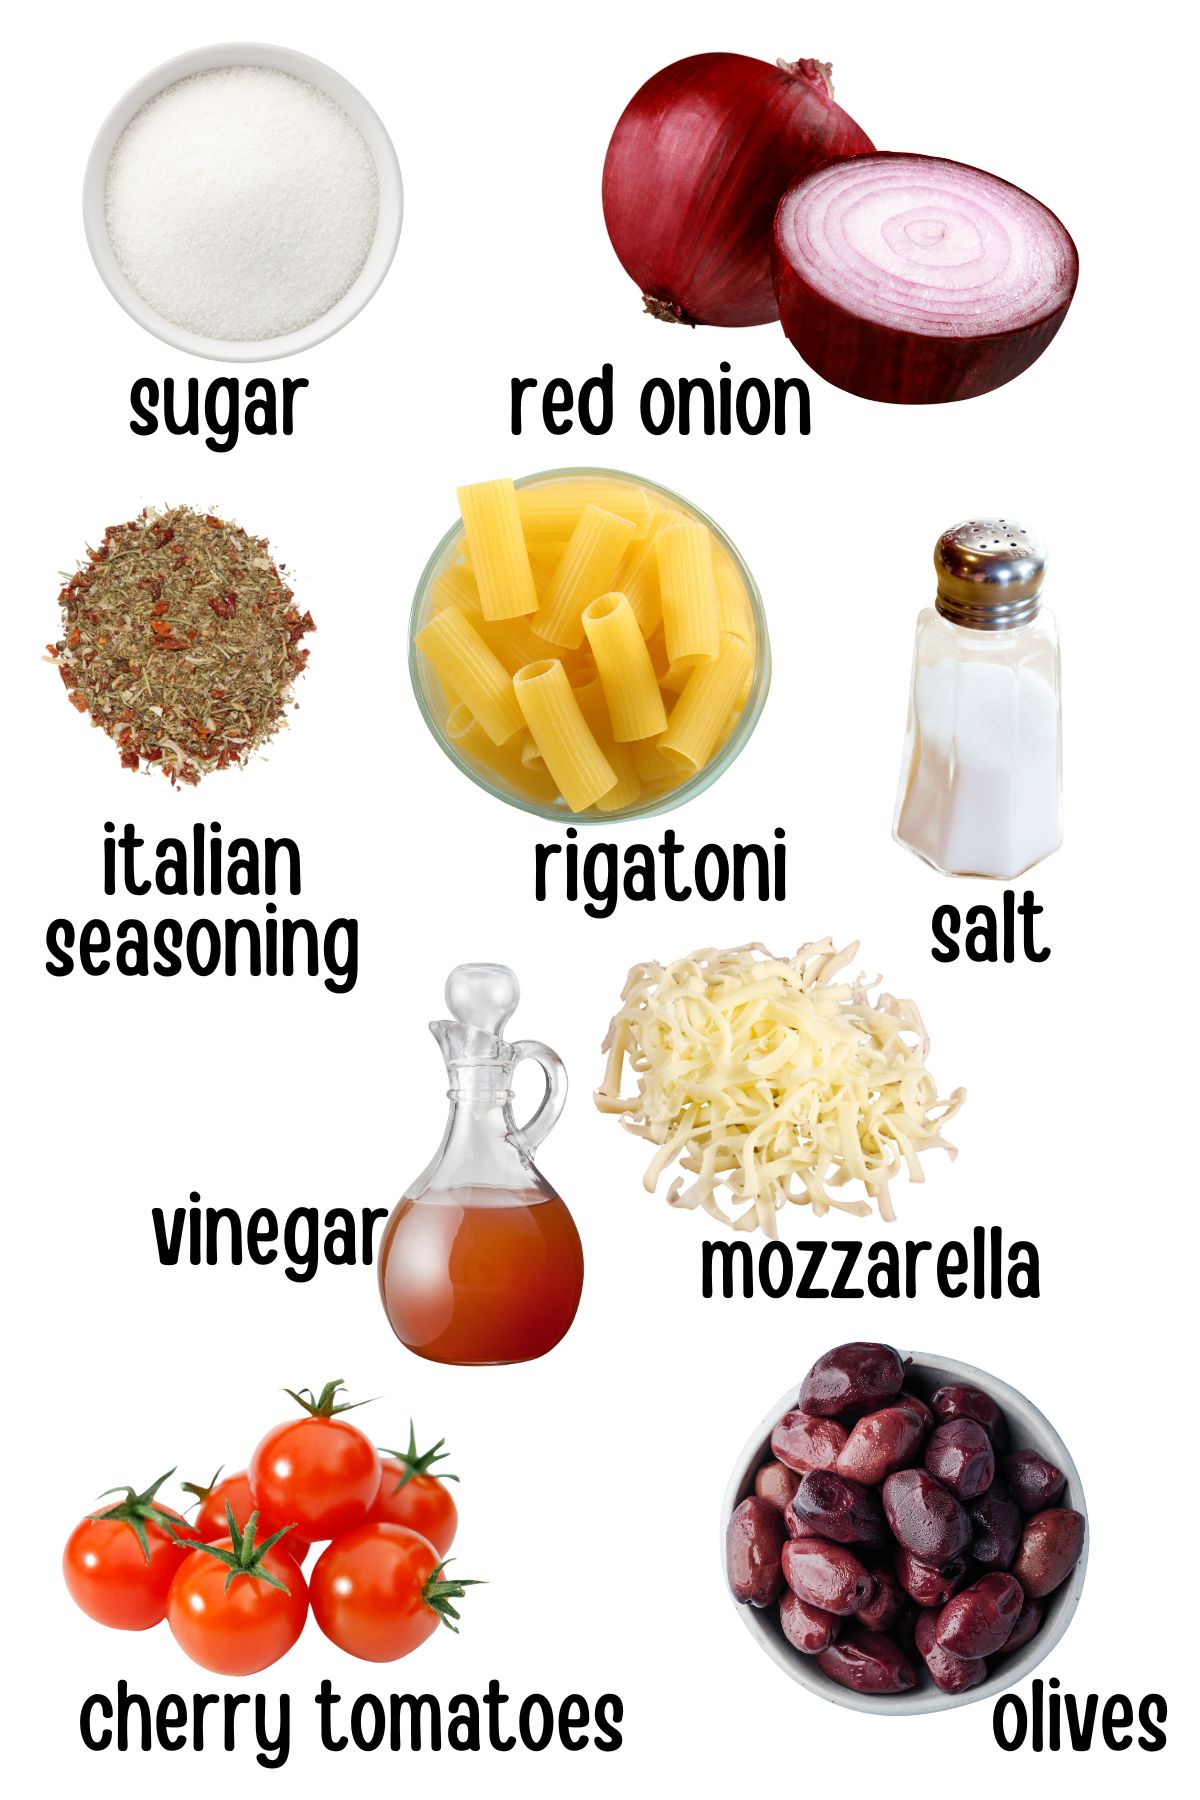 Labeled ingredients for this recipe include sugar, red onion, italian seasoning, rigatoni pasta, salt, vinegar, mozzarella, cherry tomatoes, and black olives.